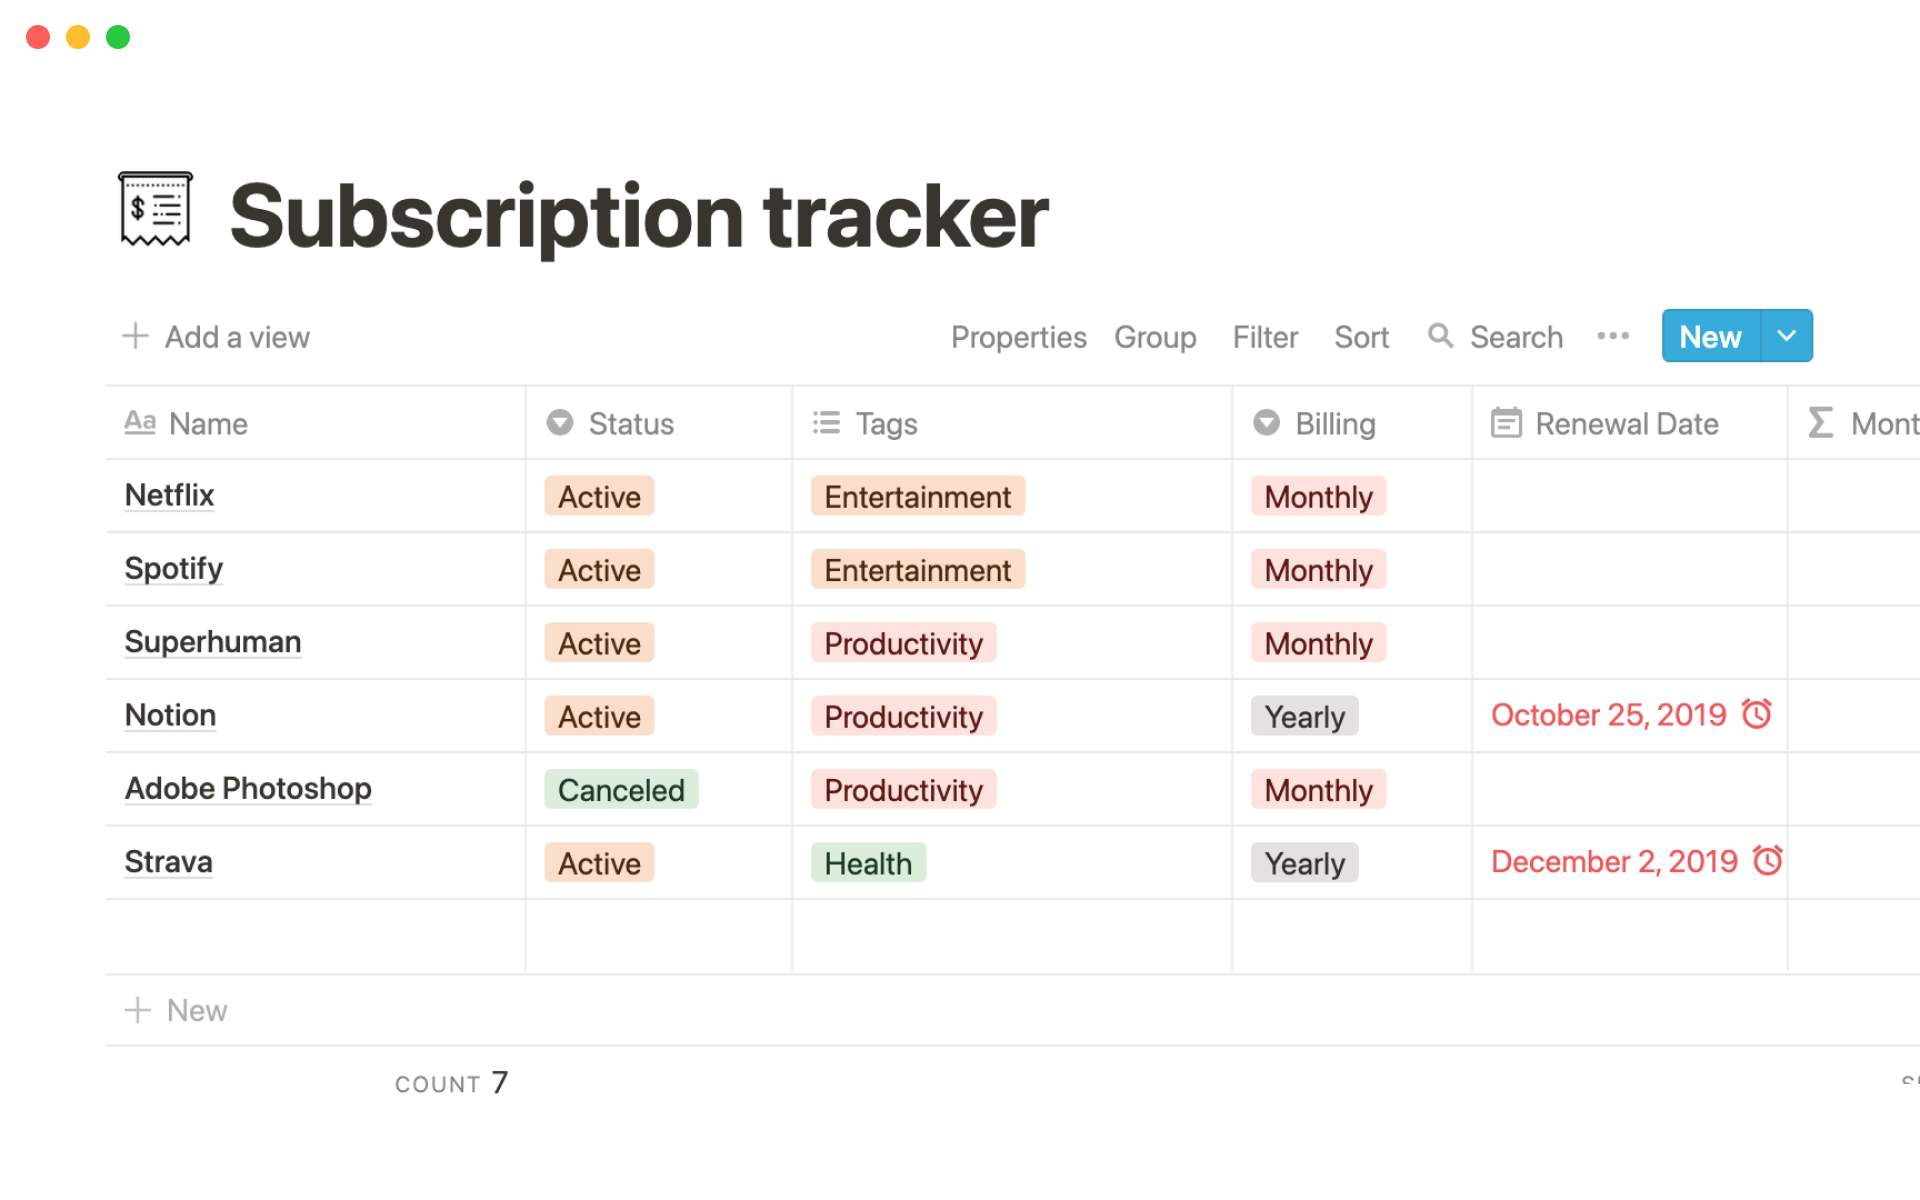 Subscription tracker with monthly/yearly cost overviews and renewal alerts.